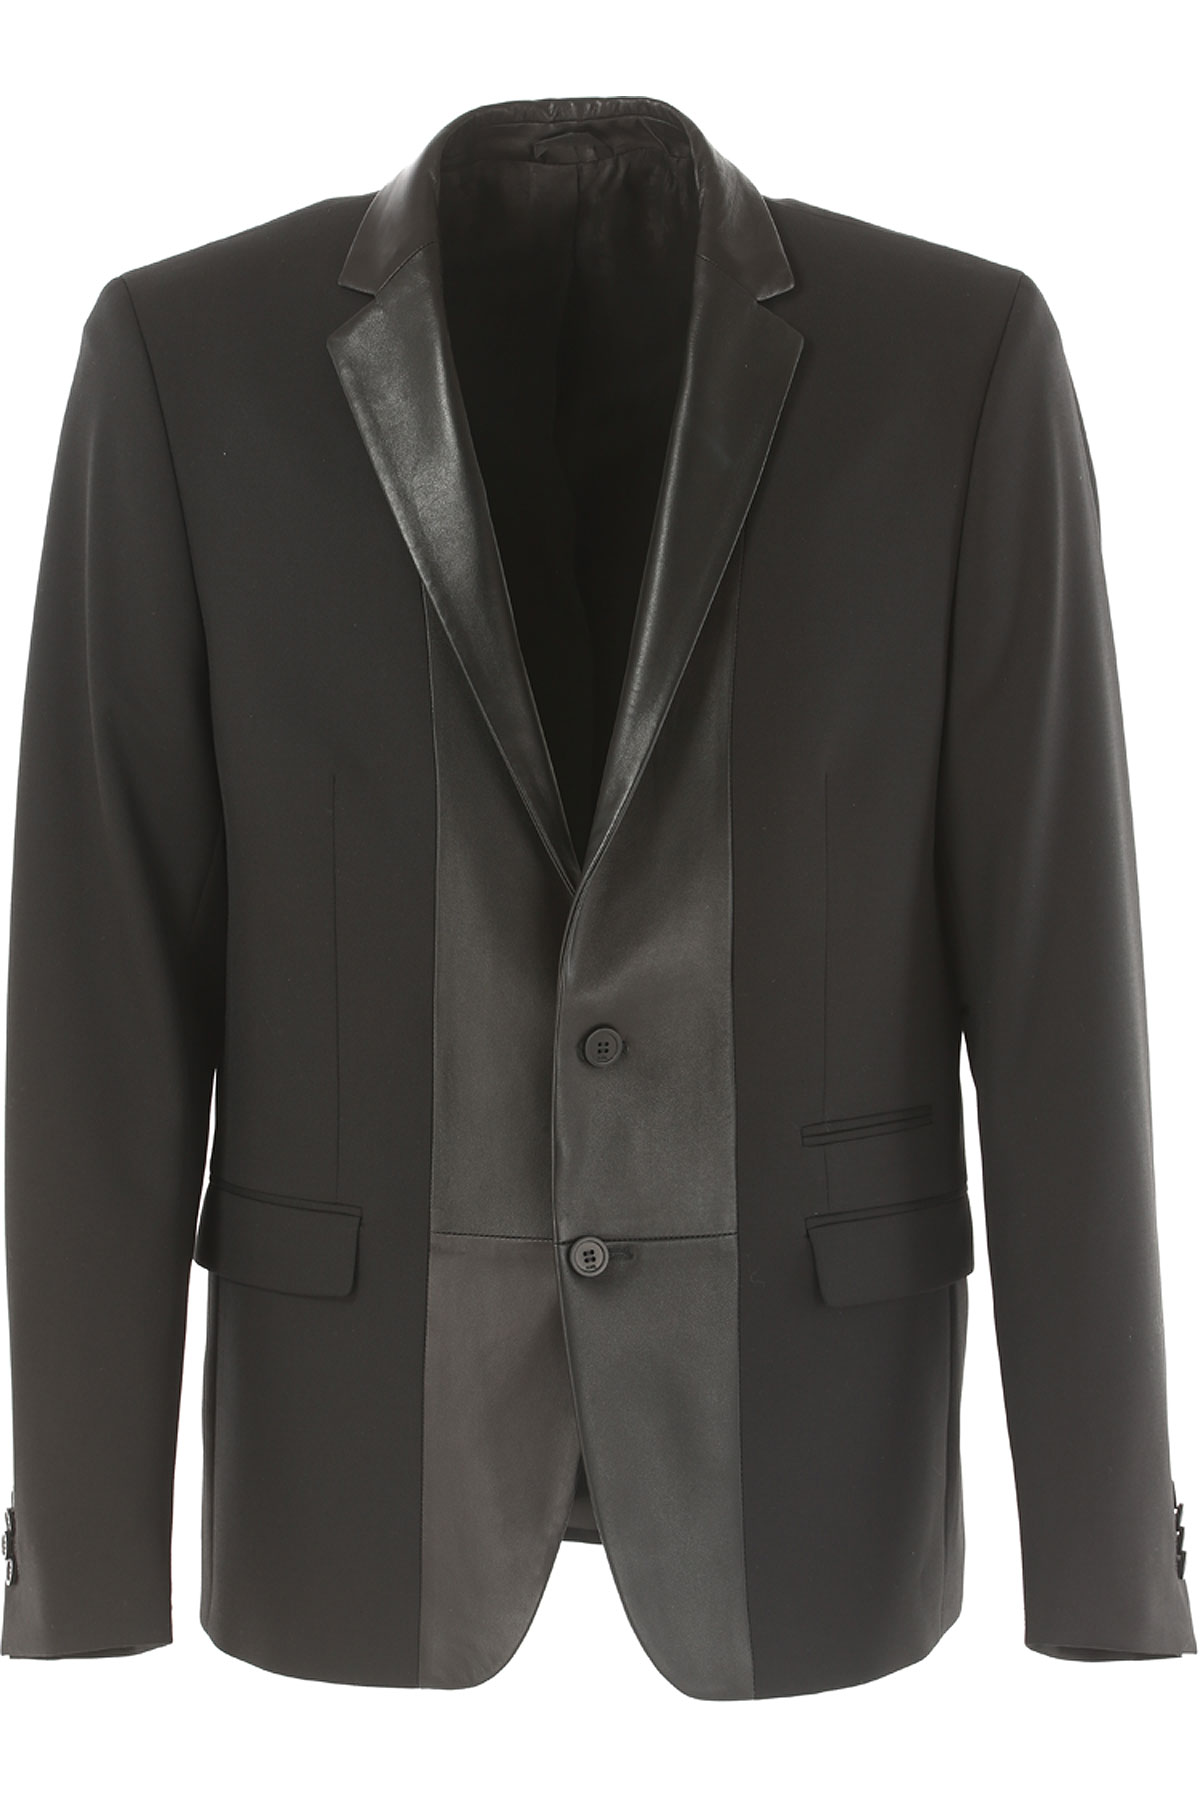 Mens Clothing Karl Lagerfeld, Style code: 557-535-503